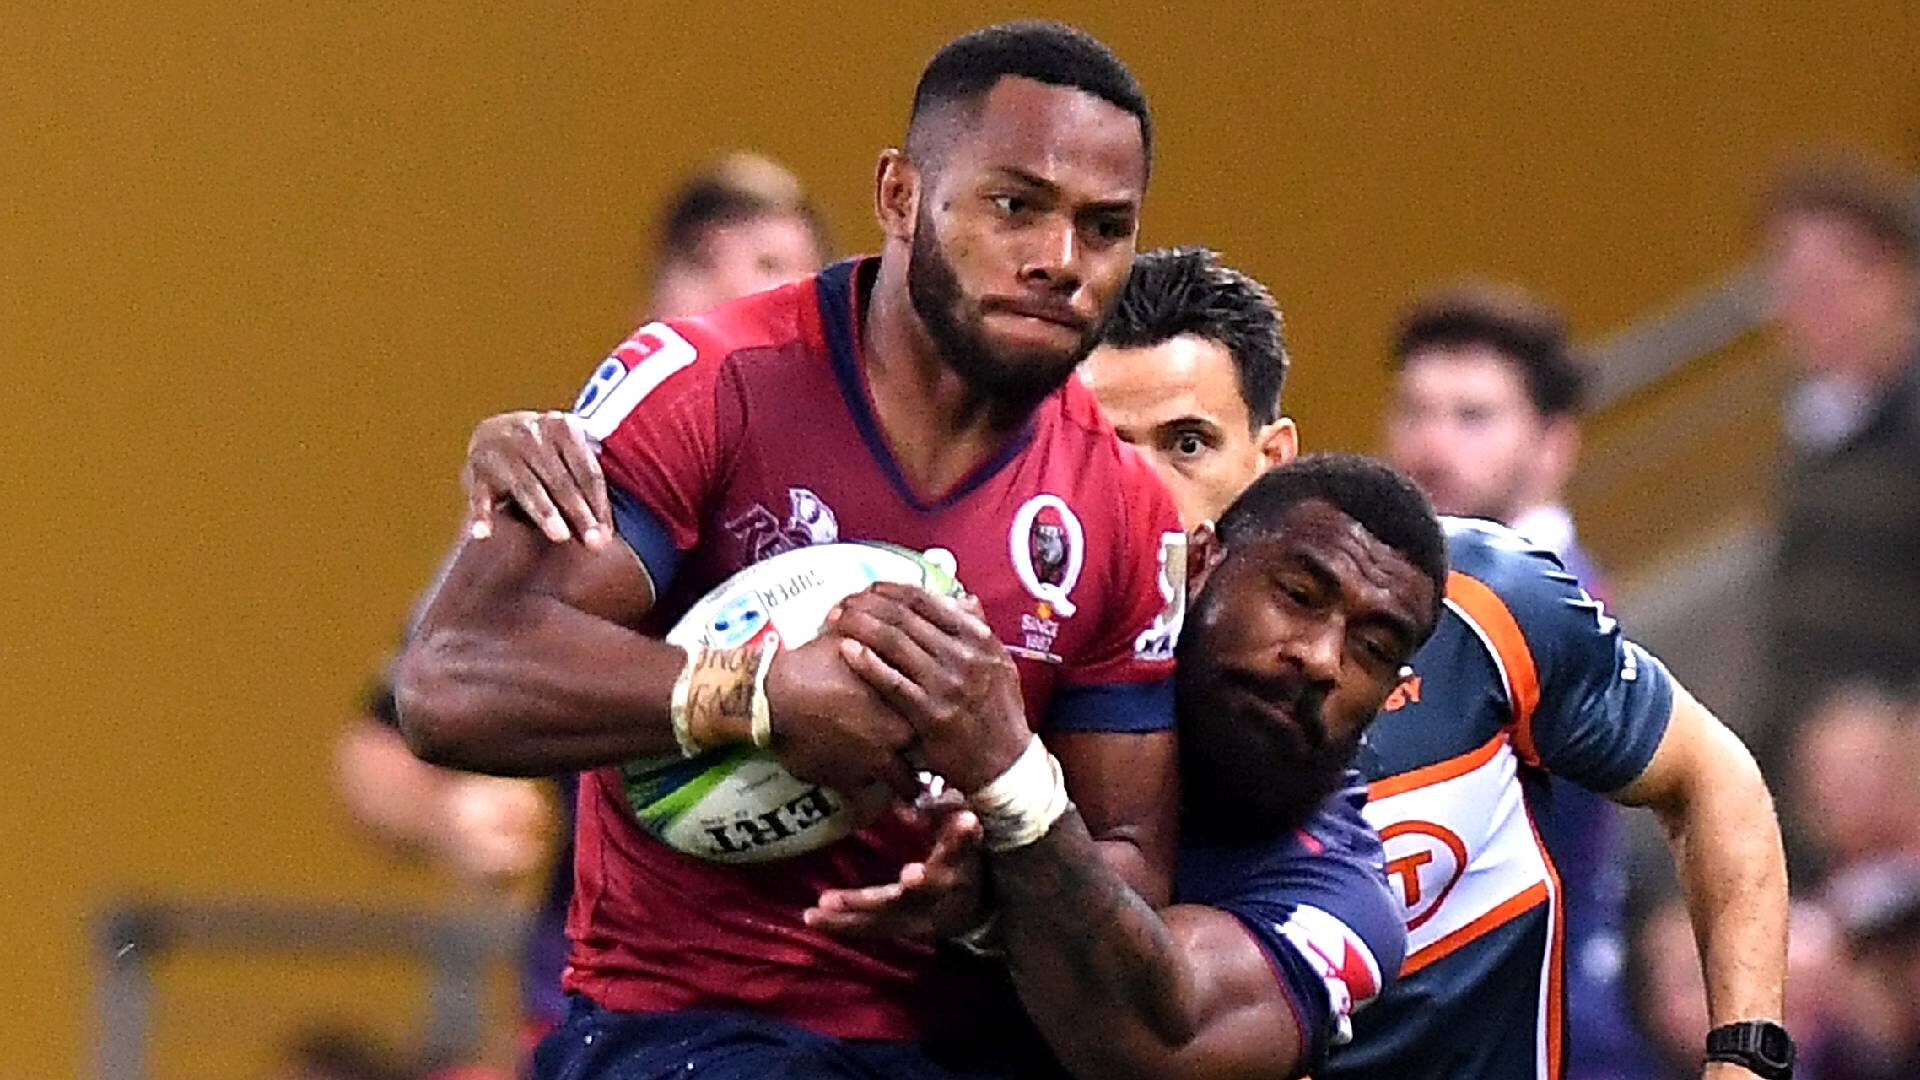 Reds wing Filipo Daugunu scores five tries but left sweating over red card picked up in Rebels thumping